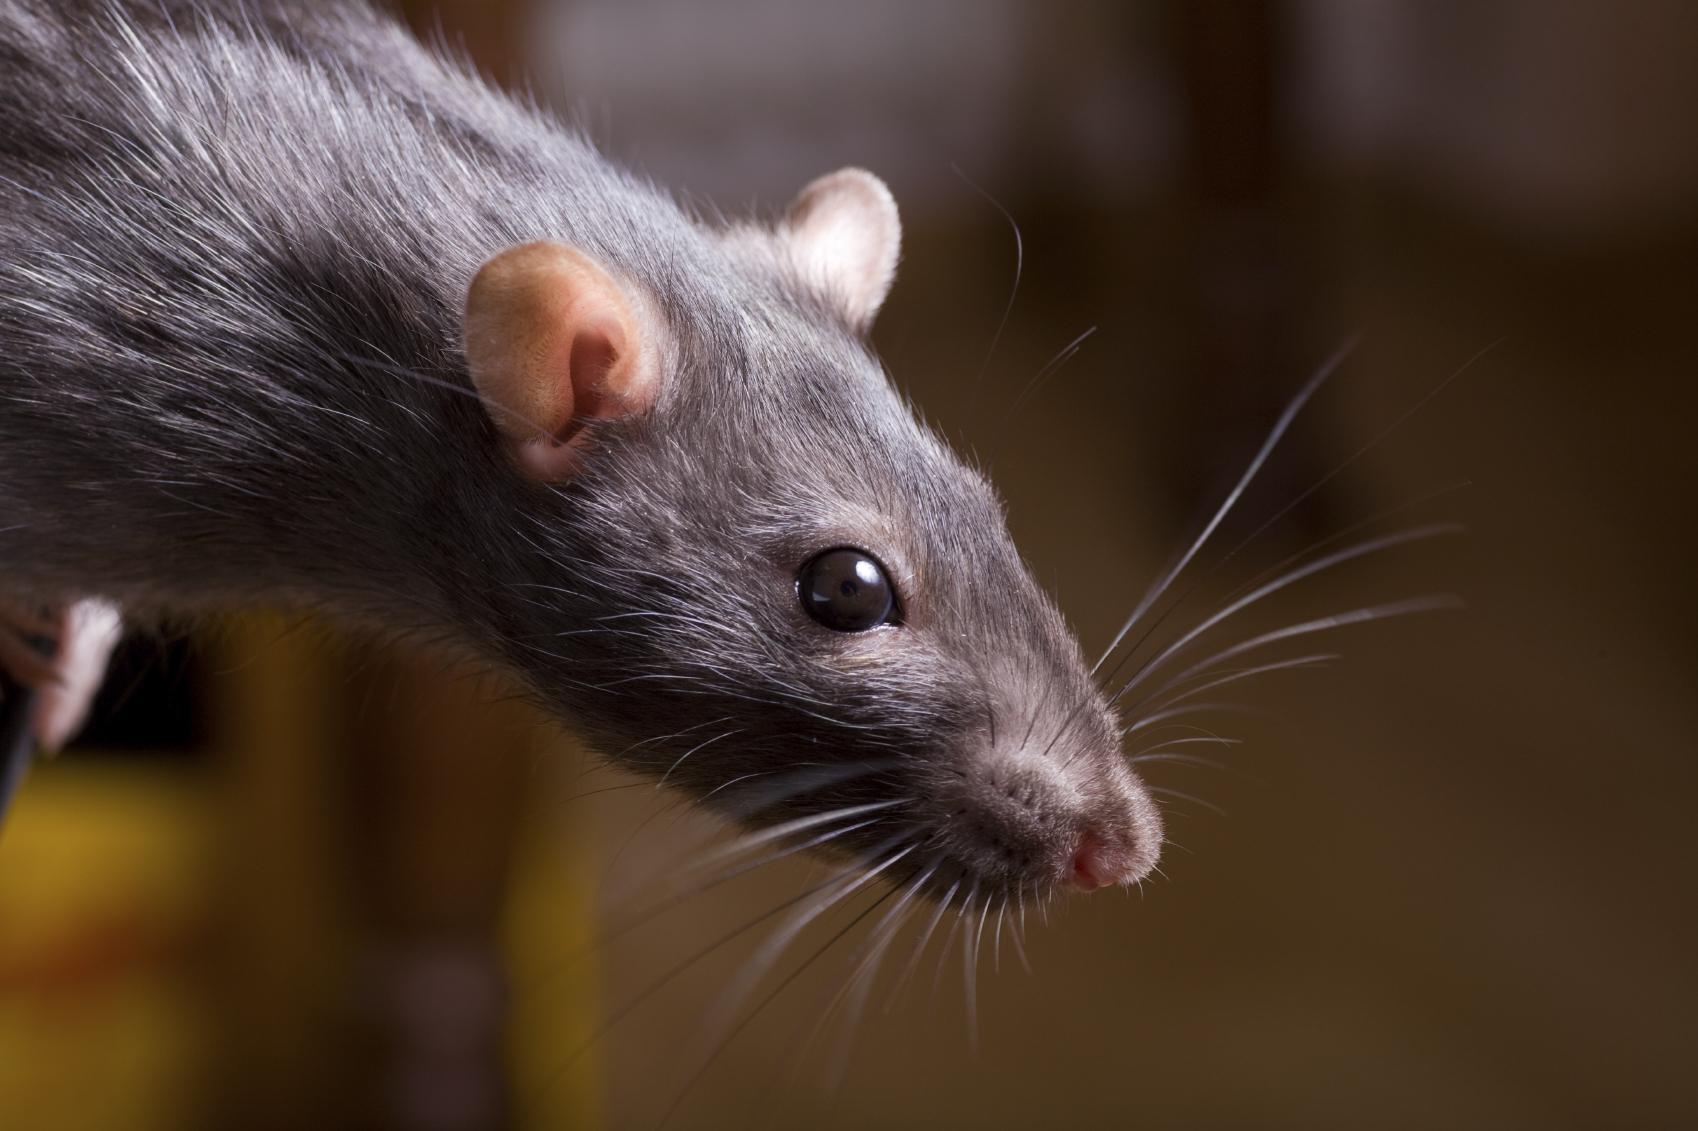 Are “Mutant Super Rats” Taking Over Western Civilization?